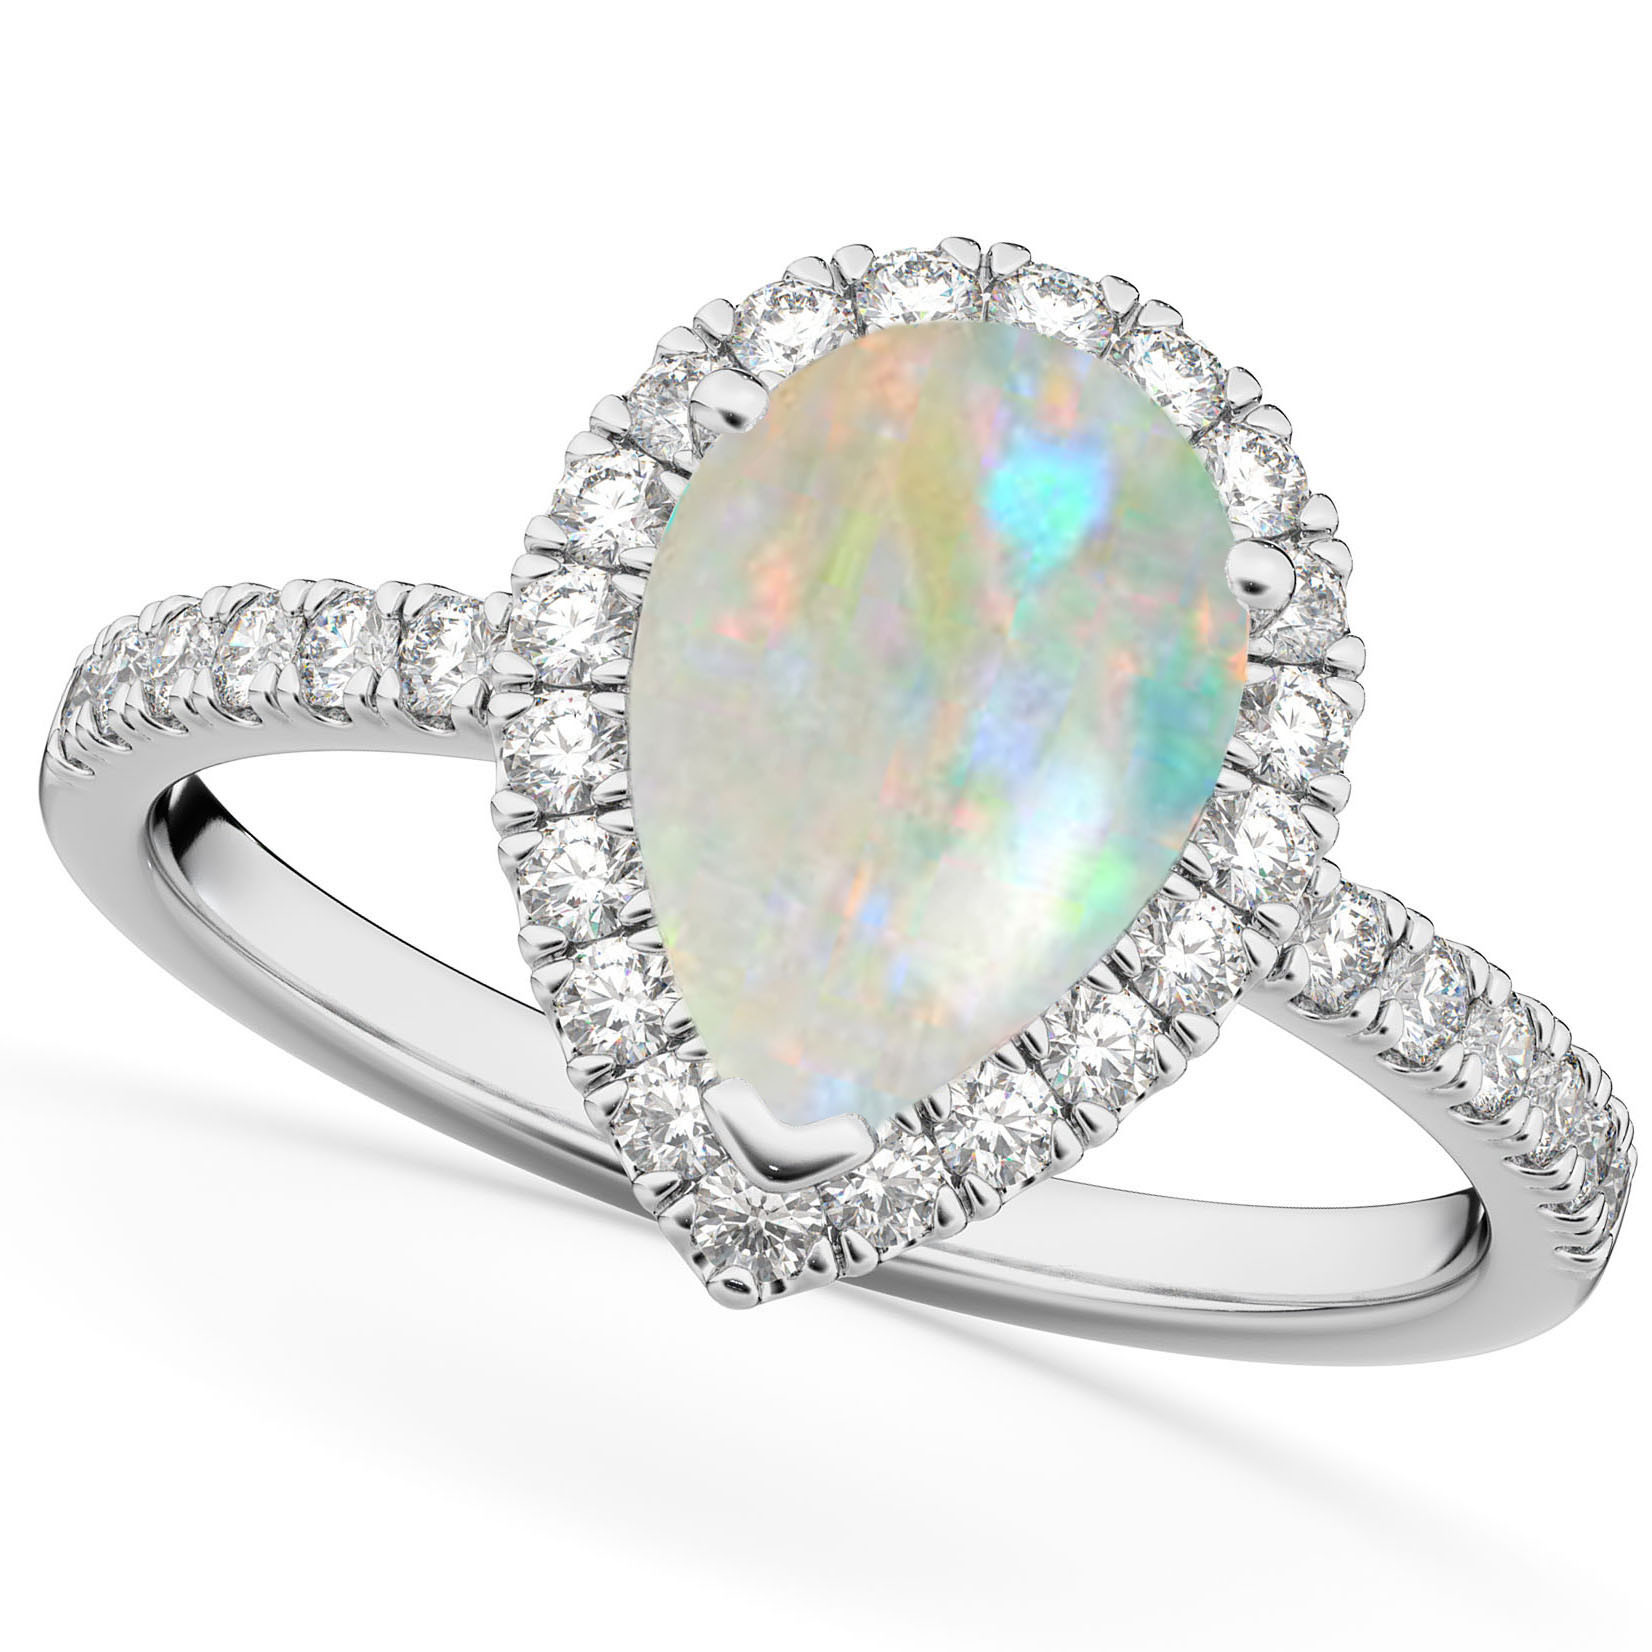 Opal And Diamond Engagement Ring
 Pear Cut Halo Opal & Diamond Engagement Ring 14K White